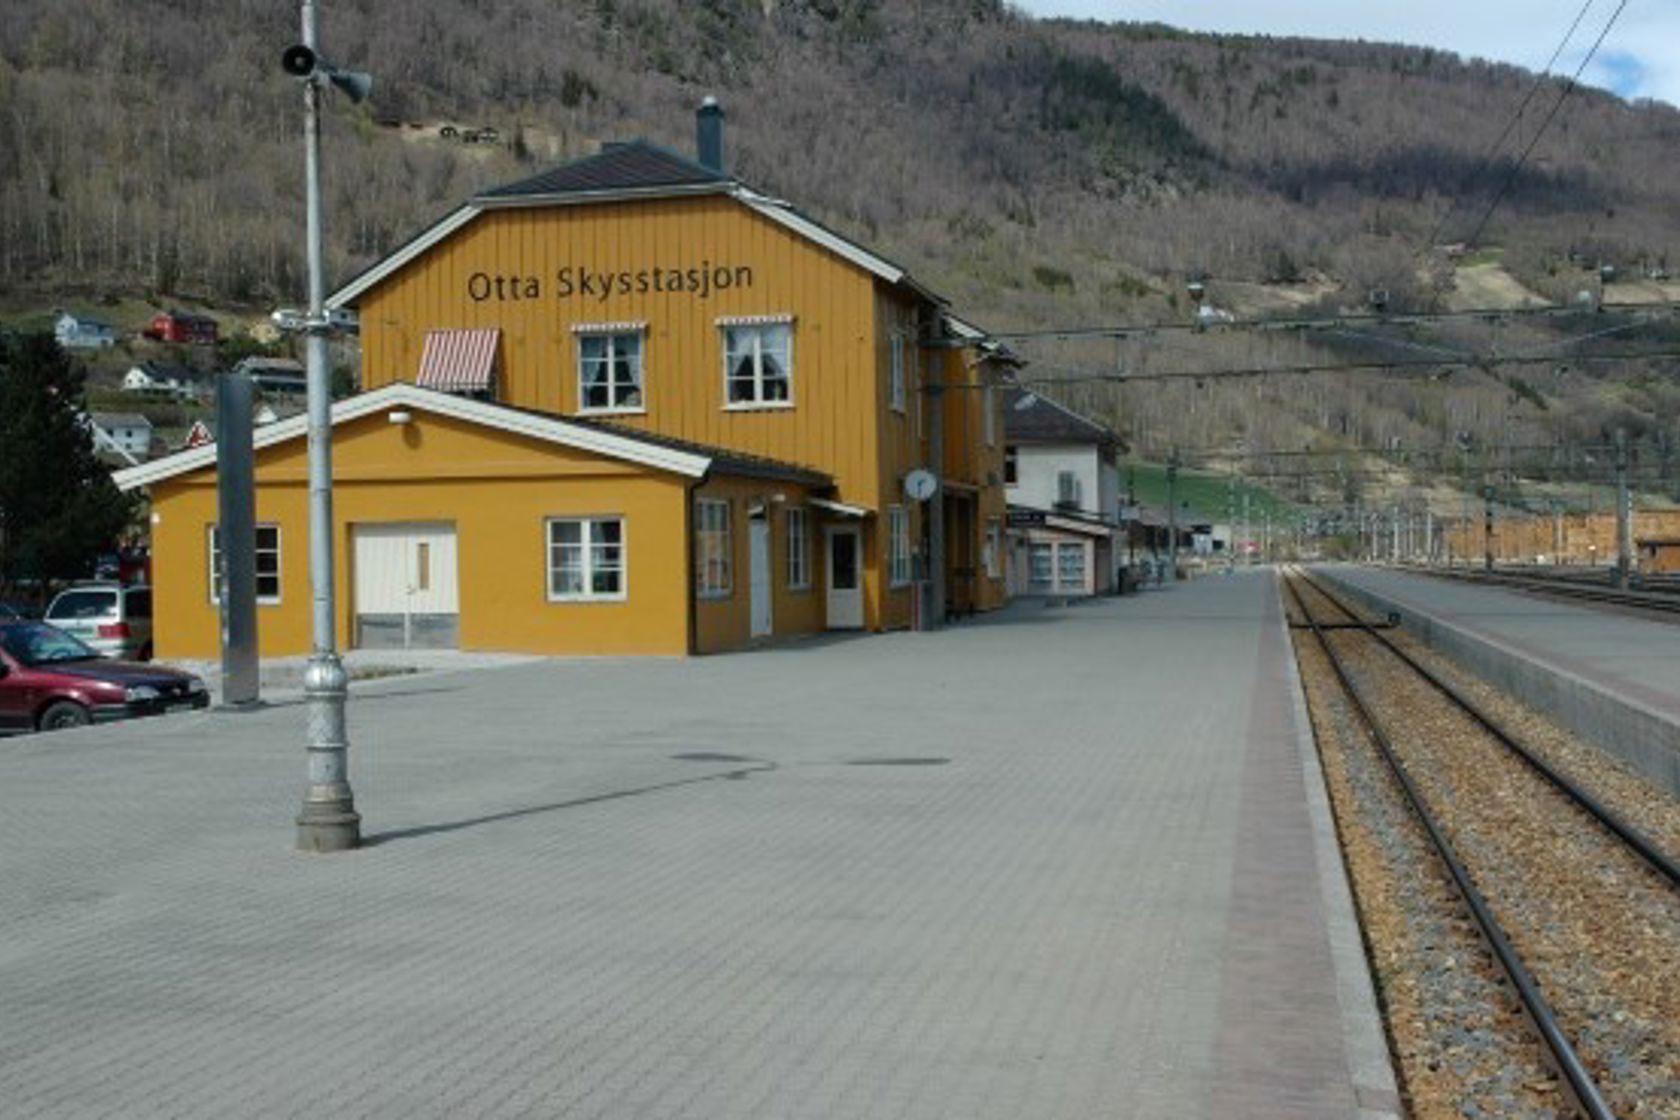 Exterior view of Otta station